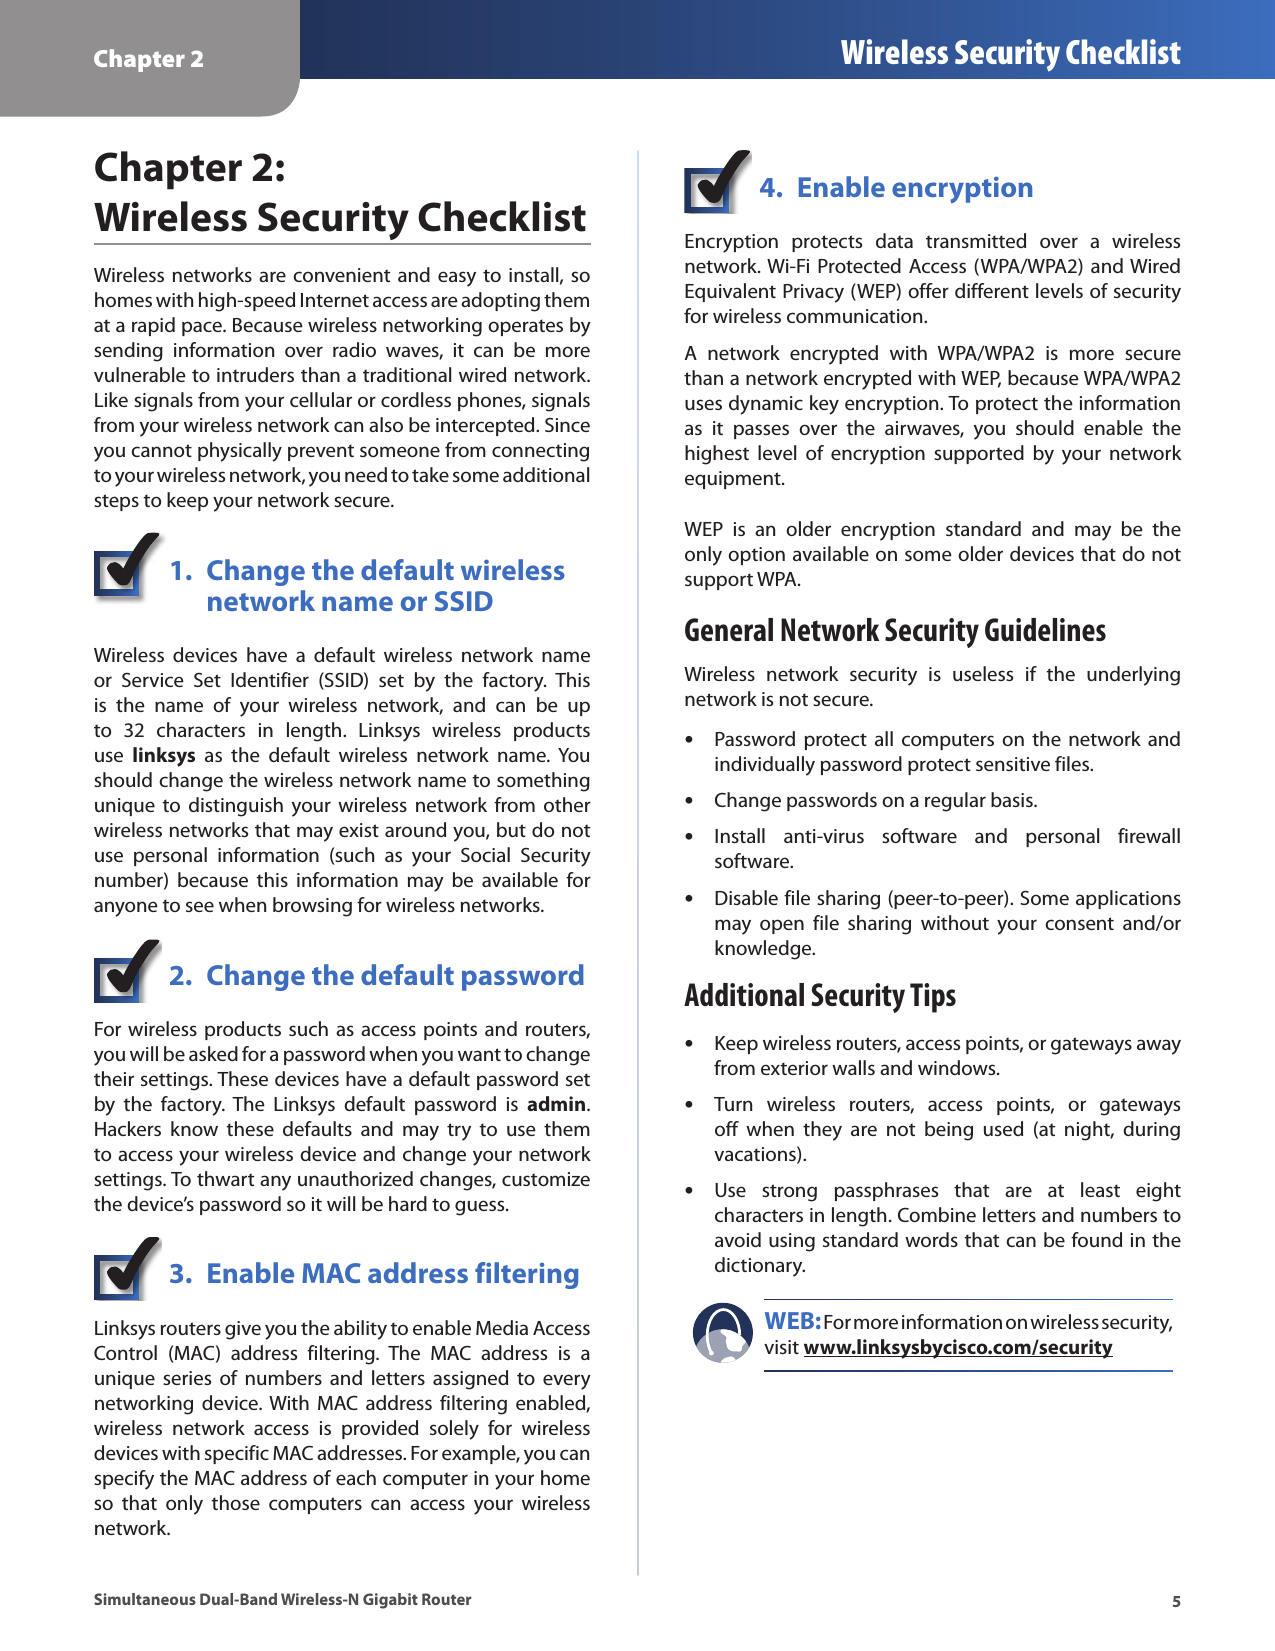 Chapter 2 Wireless Security Checklist5Simultaneous Dual-Band Wireless-N Gigabit RouterChapter 2:  Wireless Security ChecklistWireless  networks are convenient  and  easy to install, so homes with high-speed Internet access are adopting them at a rapid pace. Because wireless networking operates by sending  information  over  radio  waves,  it  can  be  more vulnerable to intruders than a traditional wired network. Like signals from your cellular or cordless phones, signals from your wireless network can also be intercepted. Since you cannot physically prevent someone from connecting to your wireless network, you need to take some additional steps to keep your network secure. 1.  Change the default wireless    network name or SSIDWireless  devices  have  a  default  wireless  network  name or  Service  Set  Identifier  (SSID)  set  by  the  factory.  This is  the  name  of  your  wireless  network,  and  can  be  up to  32  characters  in  length.  Linksys  wireless  products use  linksys  as  the  default  wireless  network  name.  You should change the wireless network name to something unique  to distinguish  your wireless  network from  other wireless networks that may exist around you, but do not use  personal  information  (such  as  your  Social  Security number)  because  this  information  may  be  available  for anyone to see when browsing for wireless networks. 2.  Change the default passwordFor wireless products such as access points and routers, you will be asked for a password when you want to change their settings. These devices have a default password set by  the  factory.  The  Linksys  default  password  is  admin. Hackers  know  these  defaults  and  may  try  to  use  them to access your wireless device and change your network settings. To thwart any unauthorized changes, customize the device’s password so it will be hard to guess.3.  Enable MAC address filteringLinksys routers give you the ability to enable Media Access Control  (MAC)  address  filtering.  The  MAC  address  is  a unique  series  of  numbers  and  letters  assigned  to  every networking  device. With  MAC  address filtering  enabled, wireless  network  access  is  provided  solely  for  wireless devices with specific MAC addresses. For example, you can specify the MAC address of each computer in your home so  that  only  those  computers  can  access  your  wireless network. 4.  Enable encryptionEncryption  protects  data  transmitted  over  a  wireless network. Wi-Fi Protected  Access (WPA/WPA2) and Wired Equivalent Privacy (WEP) offer different levels of security for wireless communication.A  network  encrypted  with  WPA/WPA2  is  more  secure than a network encrypted with WEP, because WPA/WPA2 uses dynamic key encryption. To protect the information as  it  passes  over  the  airwaves,  you  should  enable  the highest  level  of  encryption  supported  by  your  network equipment. WEP  is  an  older  encryption  standard  and  may  be  the only option available on some older devices that do not support WPA.General Network Security GuidelinesWireless  network  security  is  useless  if  the  underlying network is not secure.  •Password protect  all computers on  the network  and individually password protect sensitive files. •Change passwords on a regular basis. •Install  anti-virus  software  and  personal  firewall software. •Disable file sharing (peer-to-peer). Some applications may  open  file  sharing  without  your  consent  and/or knowledge.Additional Security Tips •Keep wireless routers, access points, or gateways away from exterior walls and windows. •Turn  wireless  routers,  access  points,  or  gateways off  when  they  are  not  being  used  (at  night,  during vacations). •Use  strong  passphrases  that  are  at  least  eight characters in length. Combine letters and numbers to avoid using standard words that can be found in the dictionary. WEB: For more information on wireless security, visit www.linksysbycisco.com/security